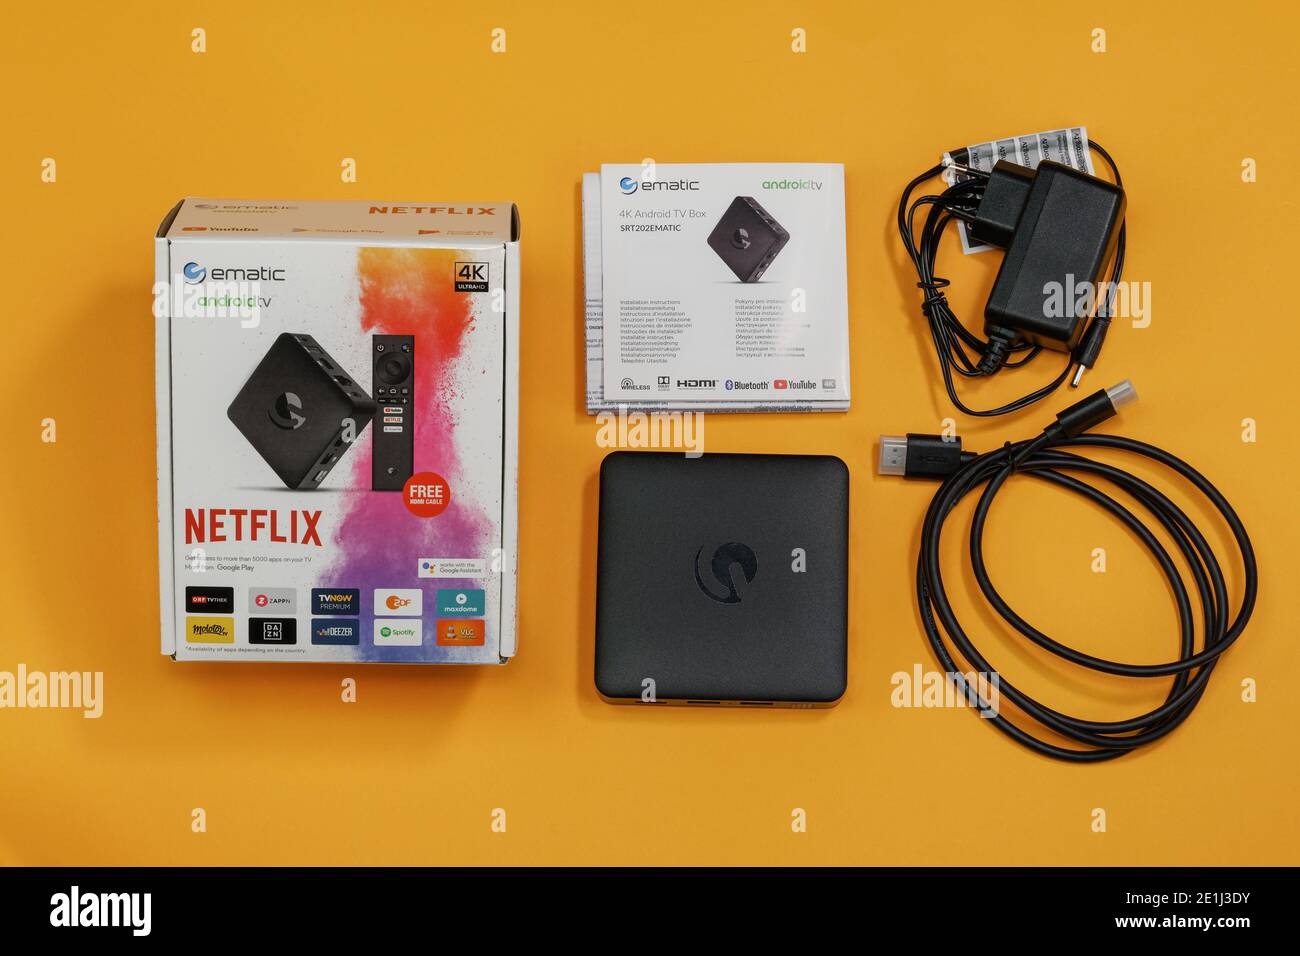 Android box top view display. Carton package containing an Ematic set-top media player streaming device including HDMI cable and wall plug Stock Photo Alamy